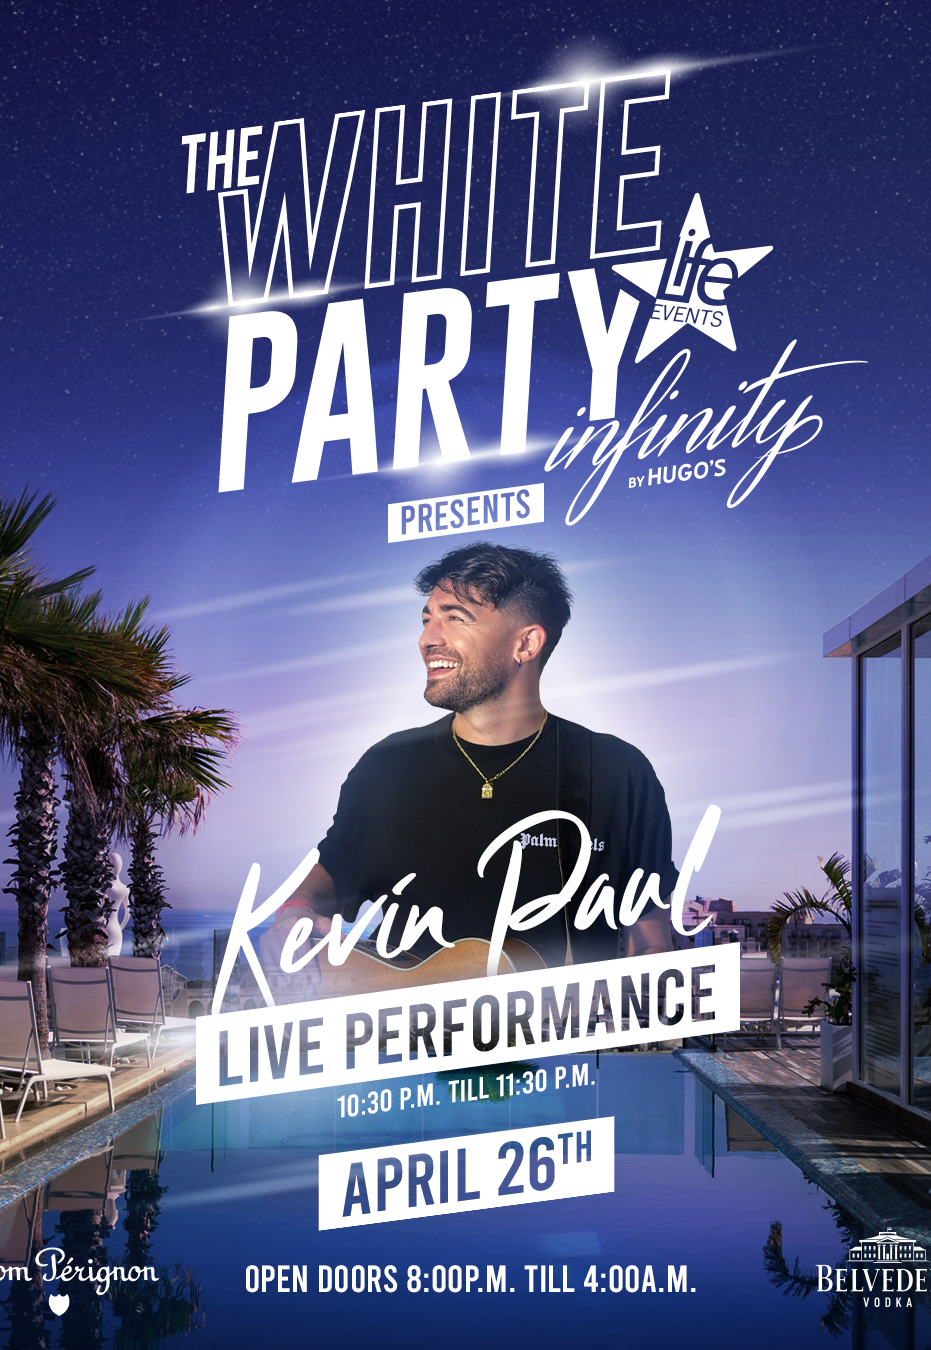 THE WHITE PARTY PRESENTS KEVIN PAUL